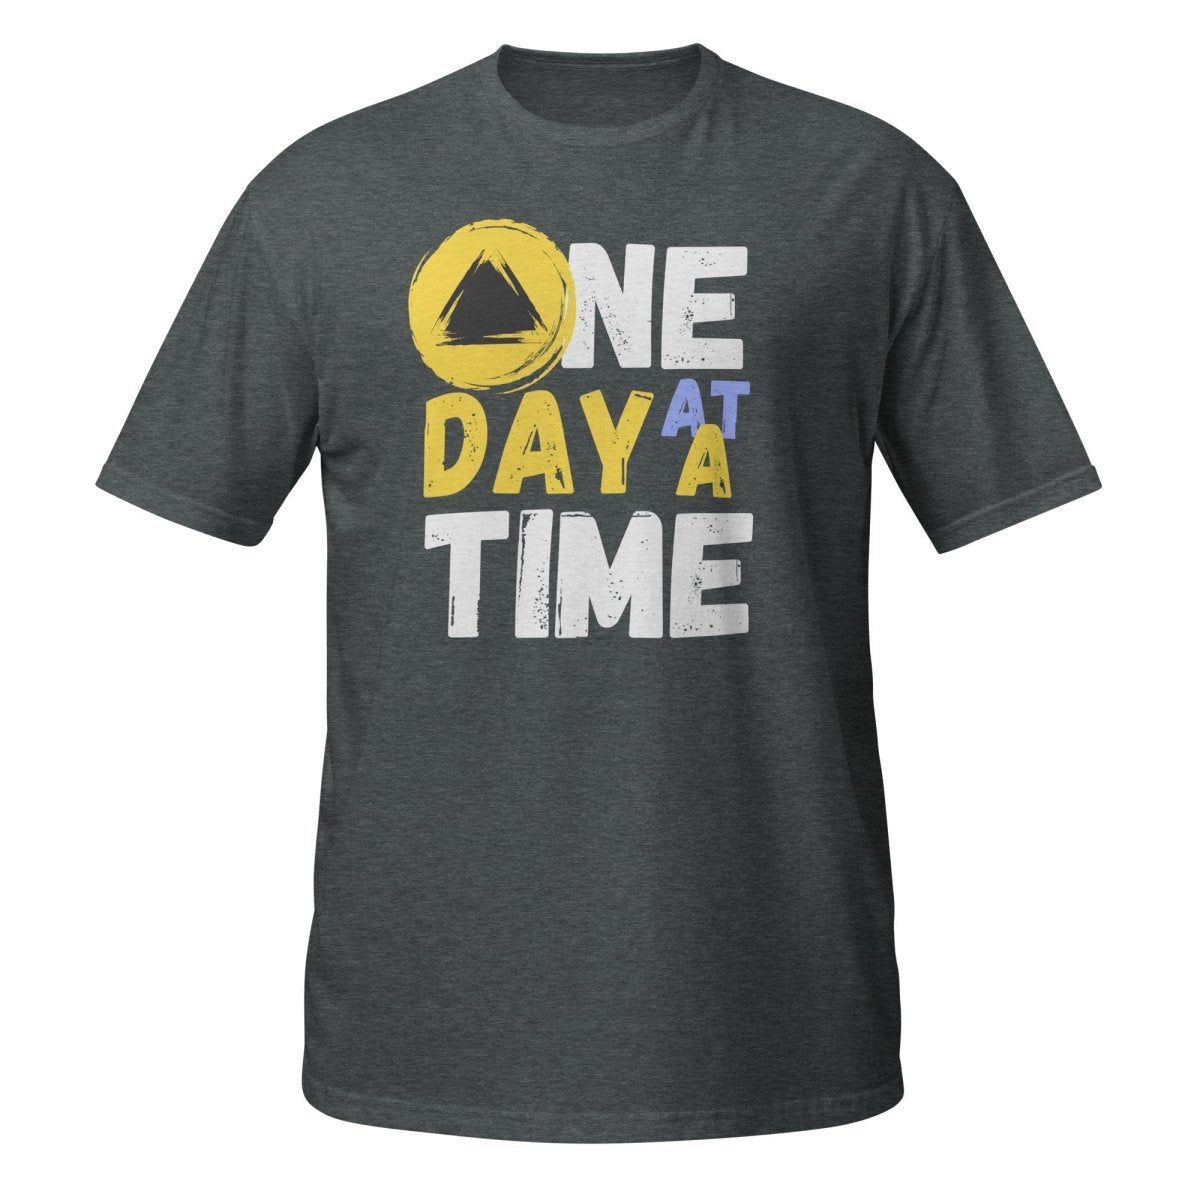 One Day at a Time - Sobriety Journey Essential Unisex Tee - Dark Heather / S | Sobervation